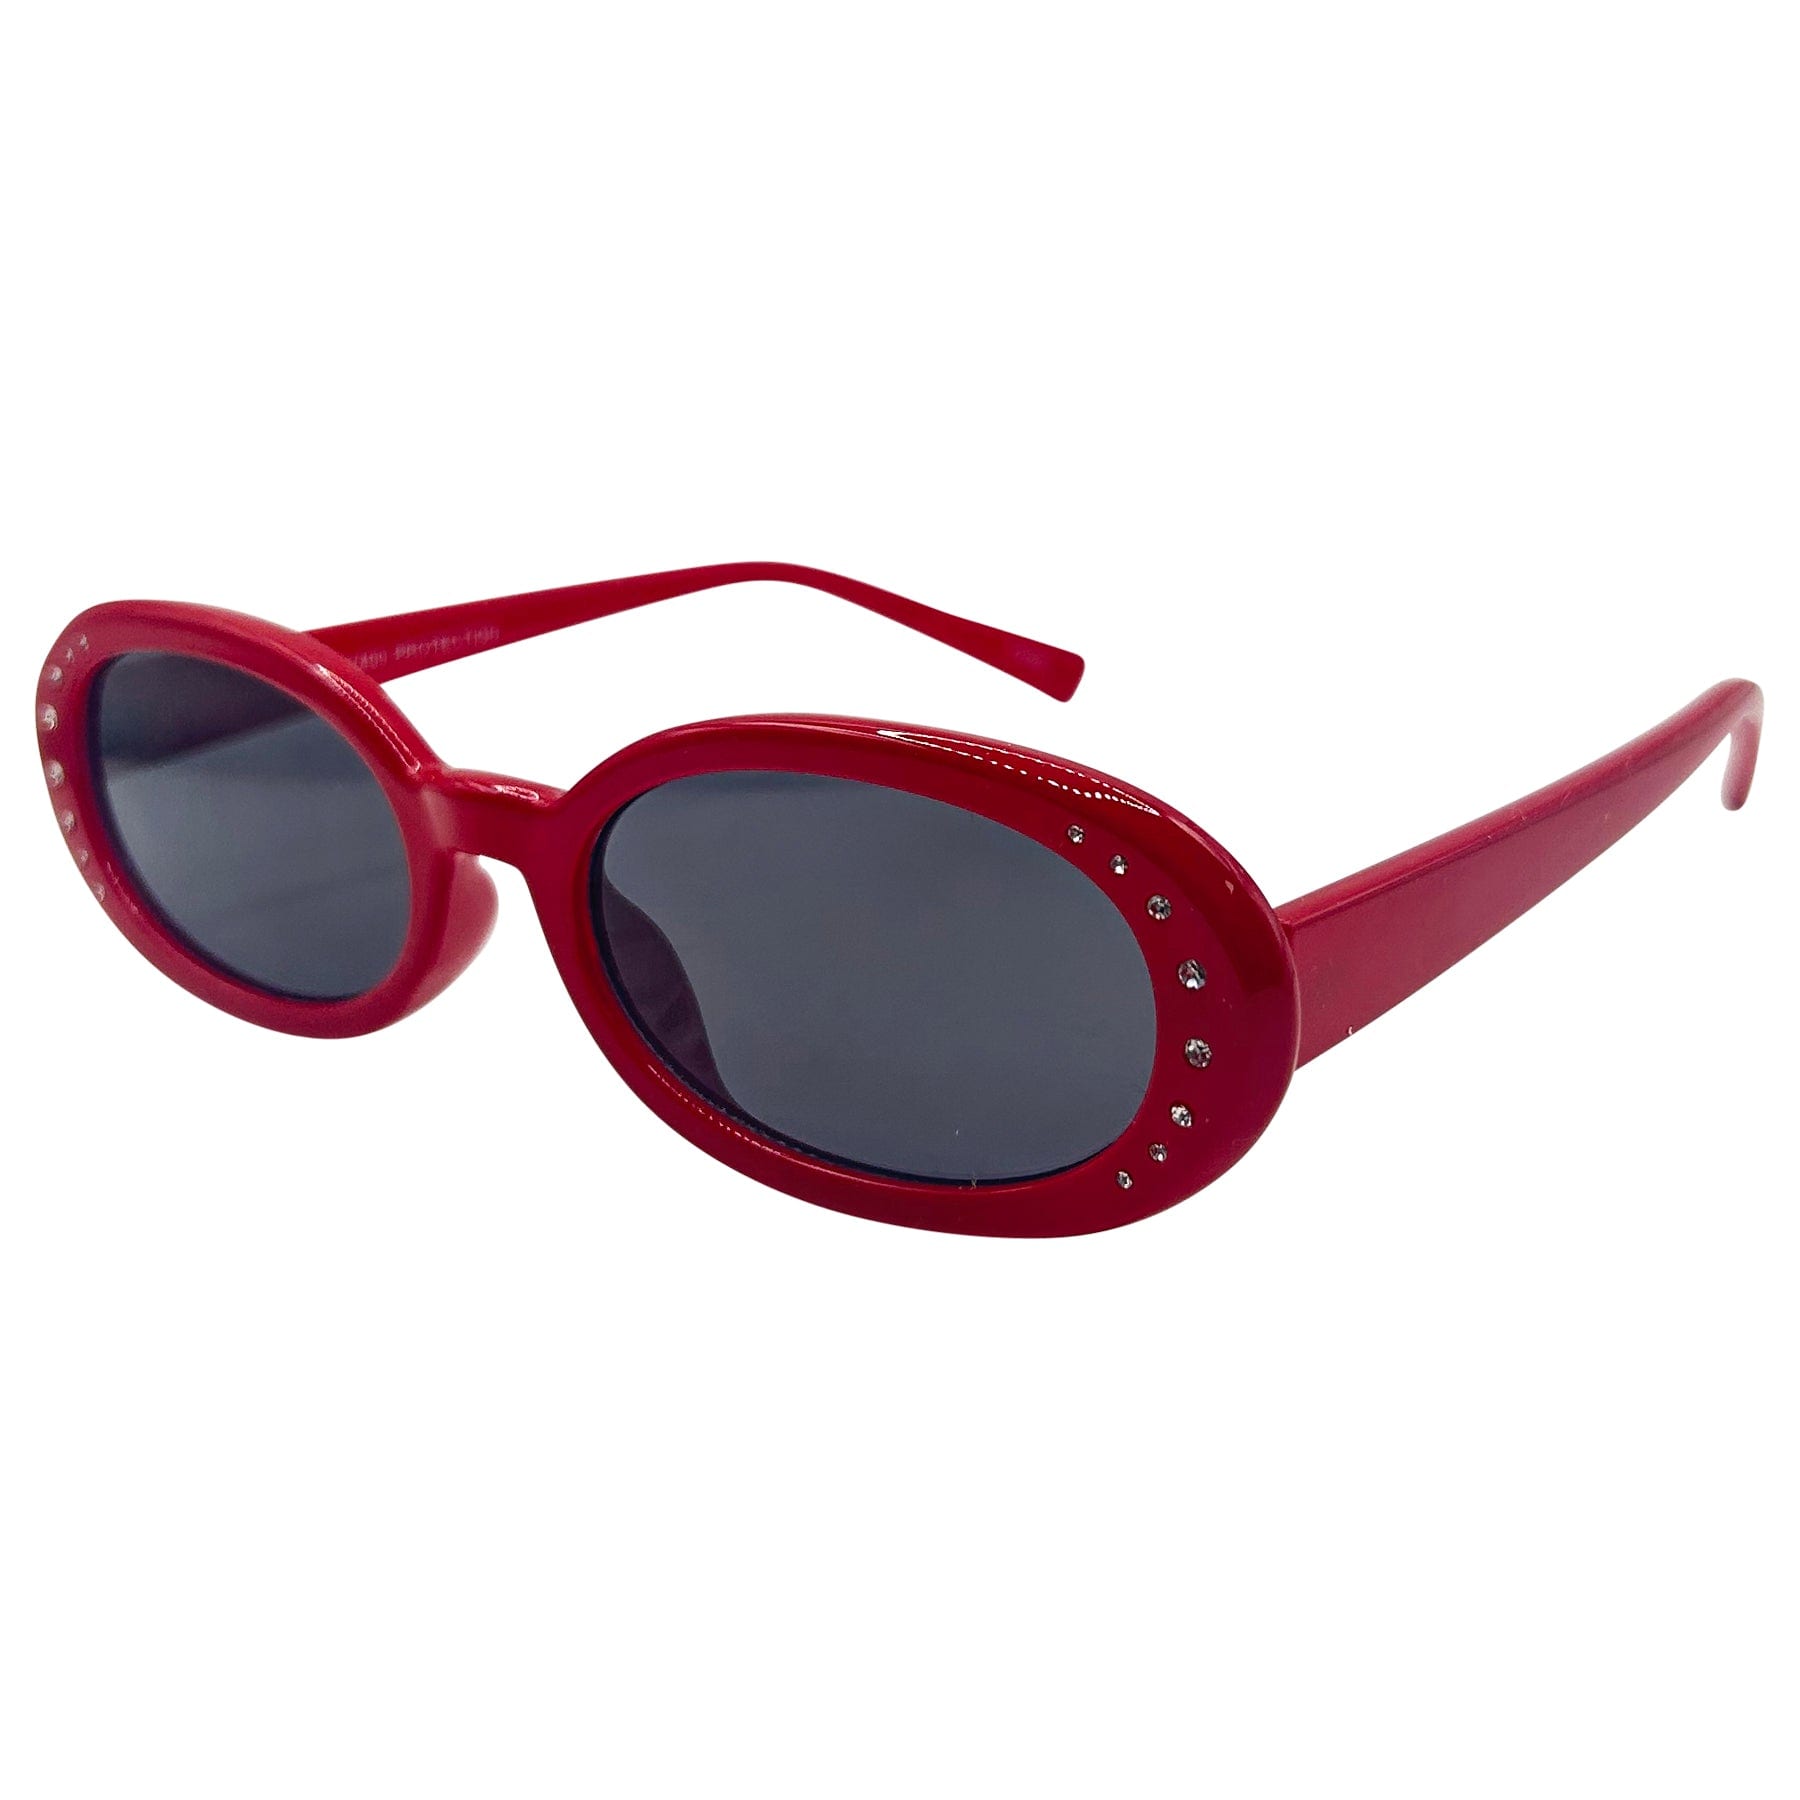 red sunglasses womens with rhinestones 90s style frame 